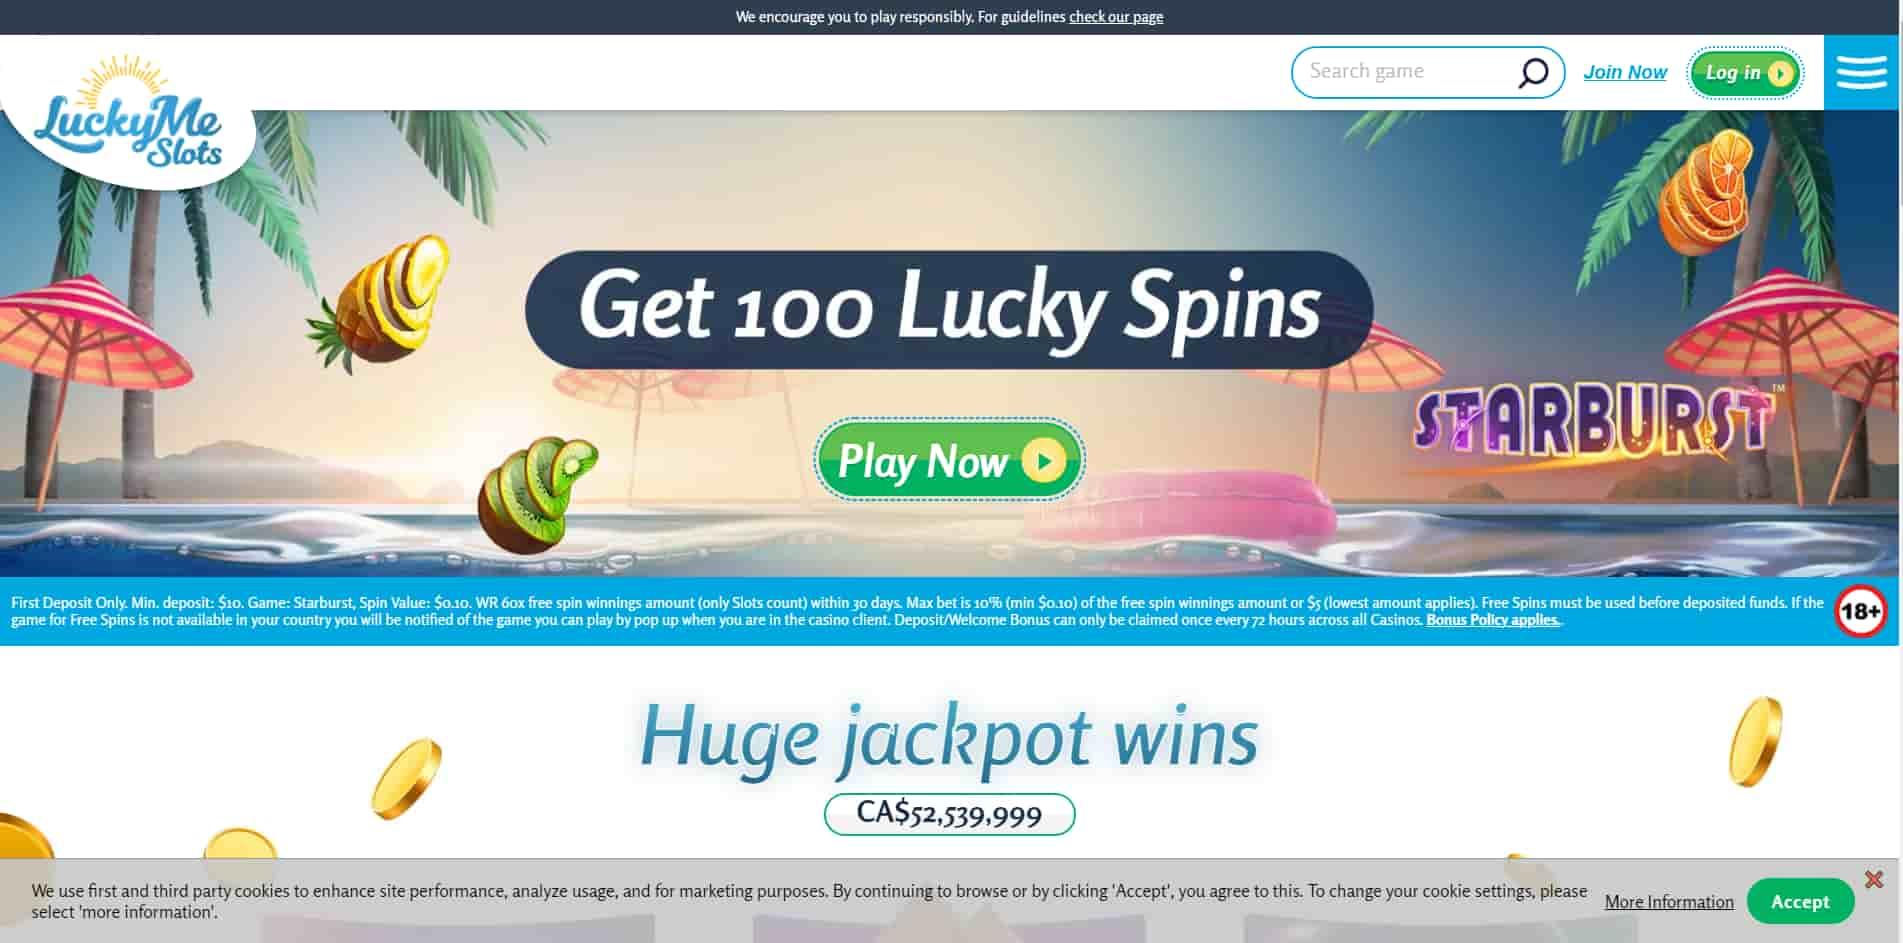 LuckyMe Slots casino homepage